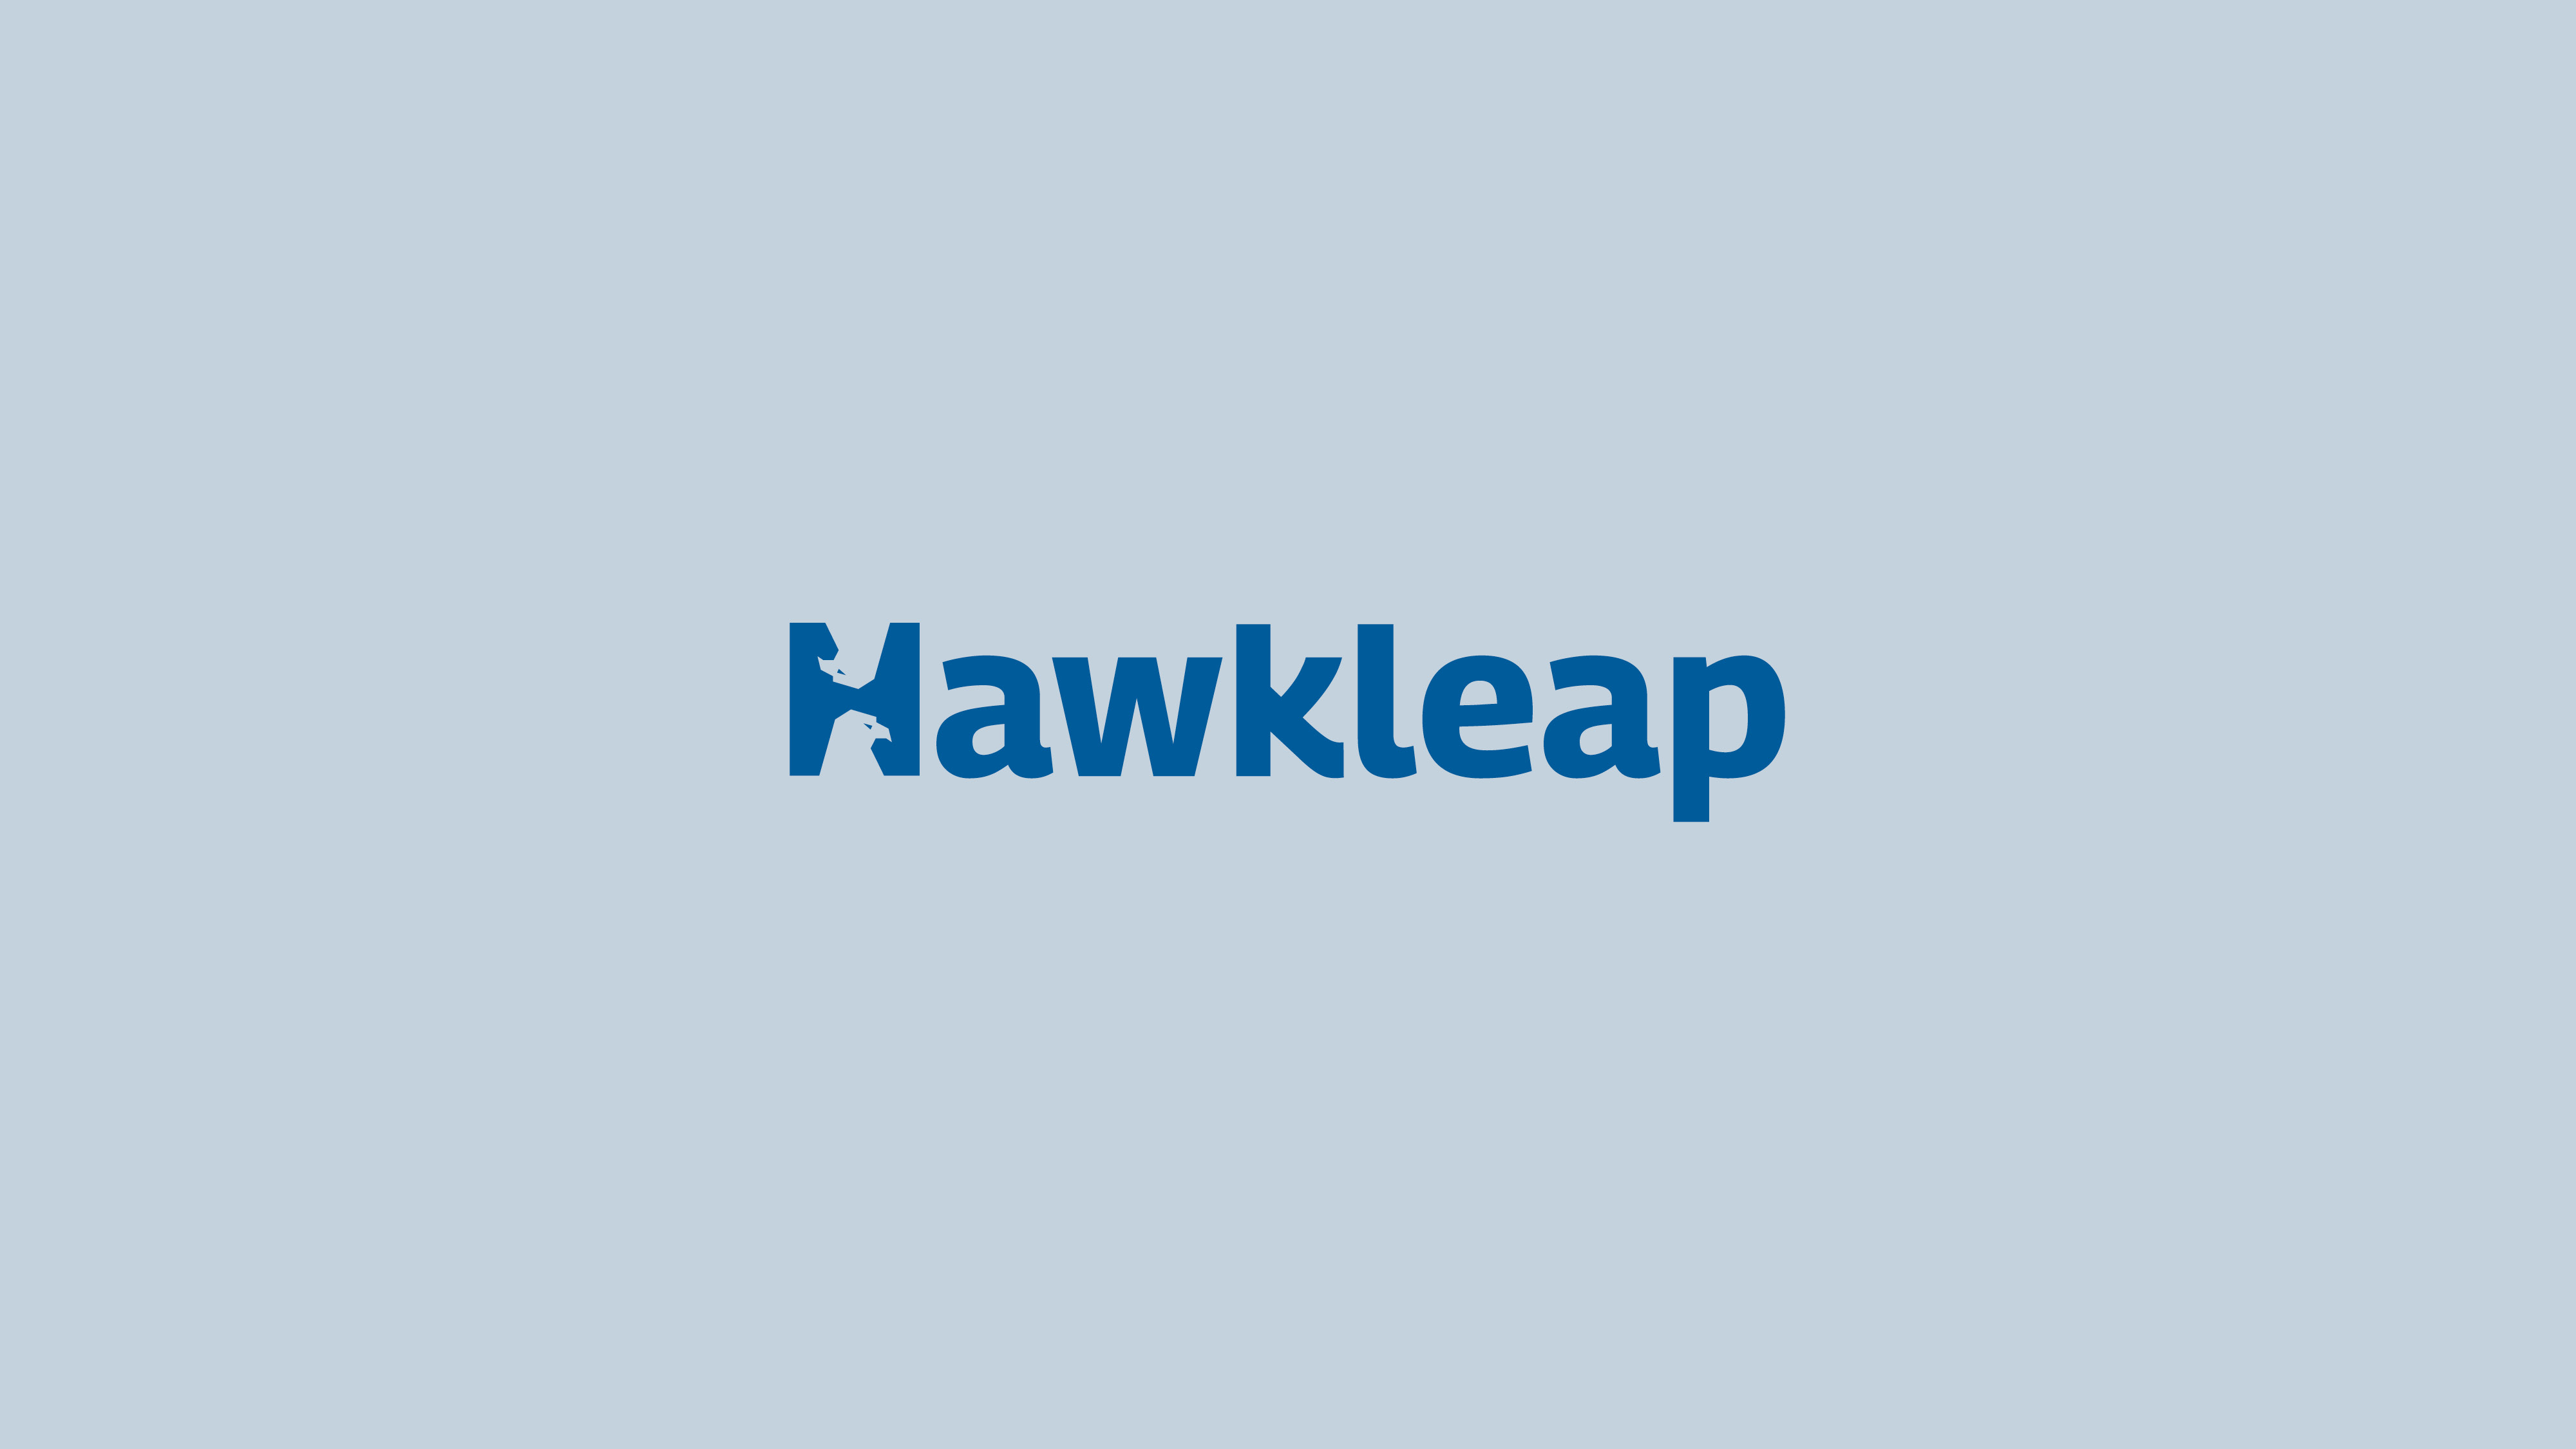 Brand Design of Hawkleap – The Art of Designing for the Aviation Industry